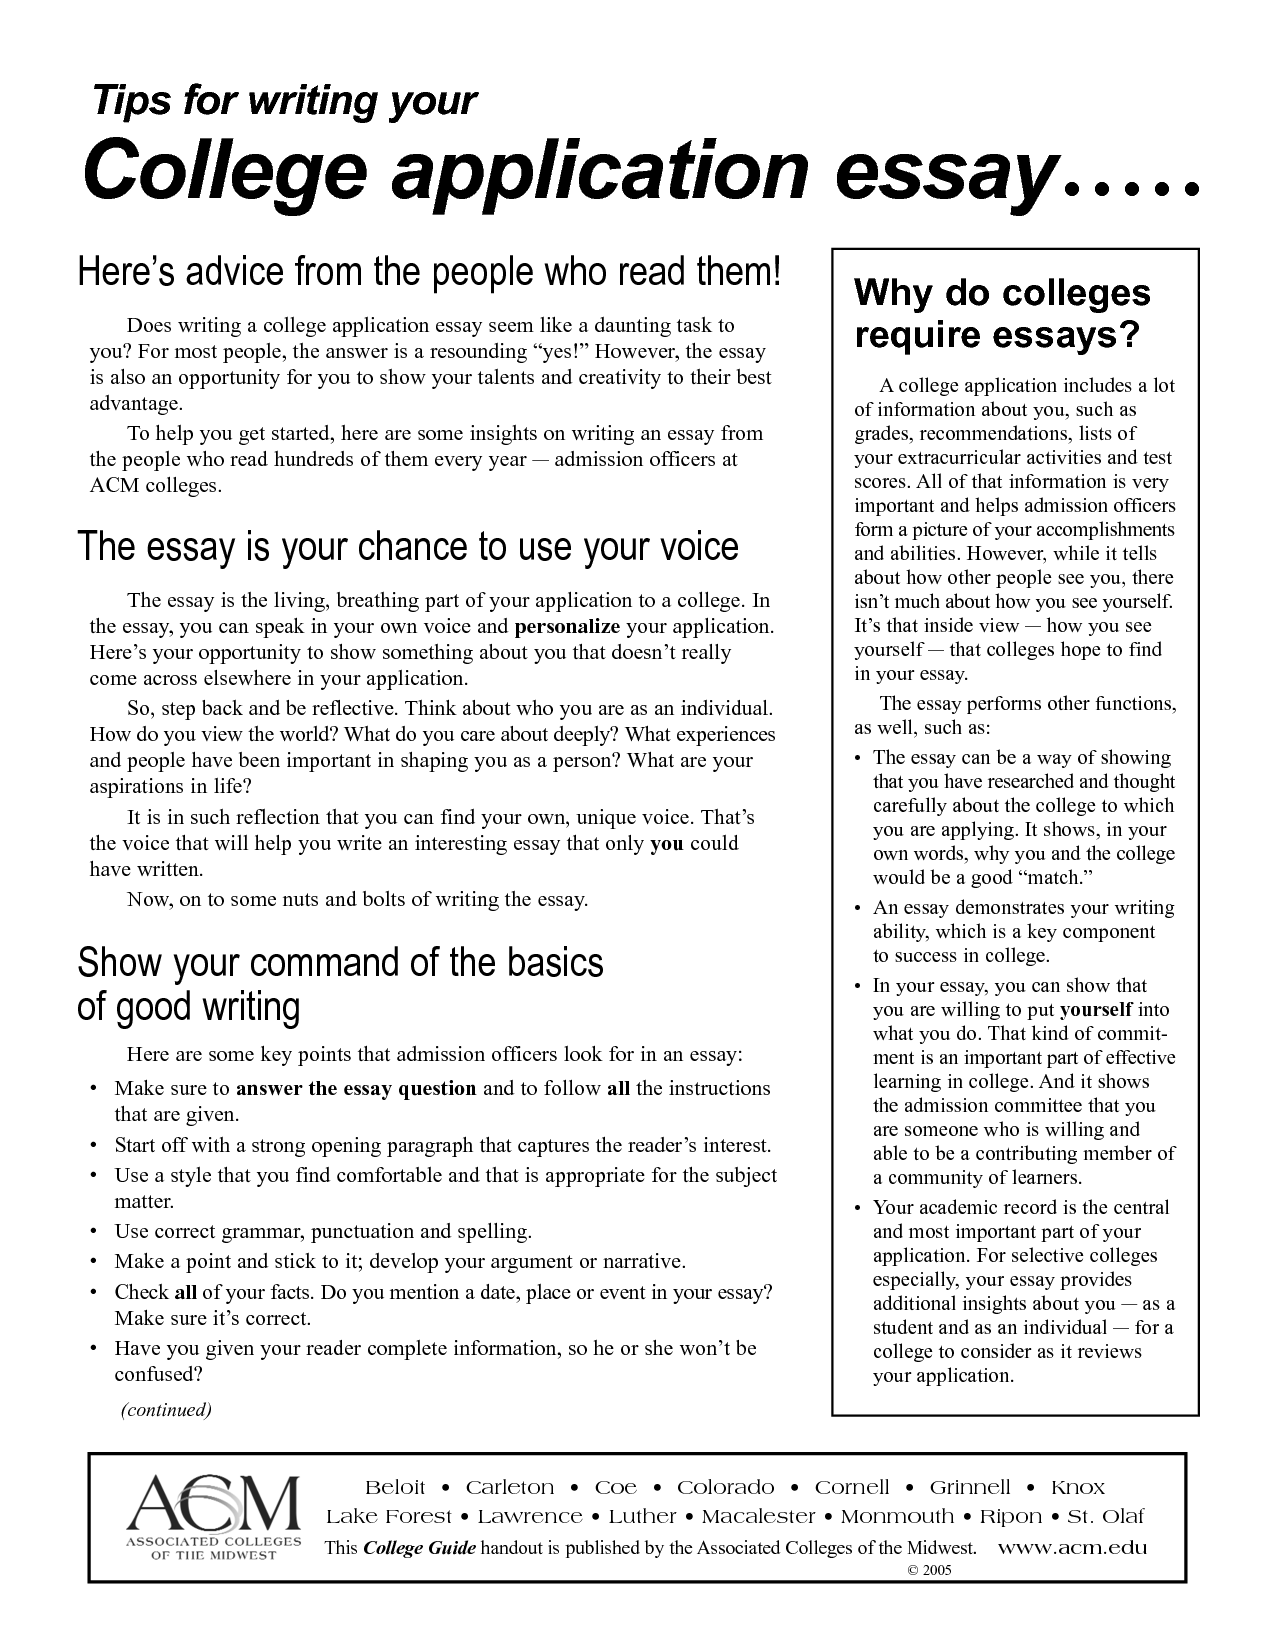 College application essay help online 25th anniversary edition